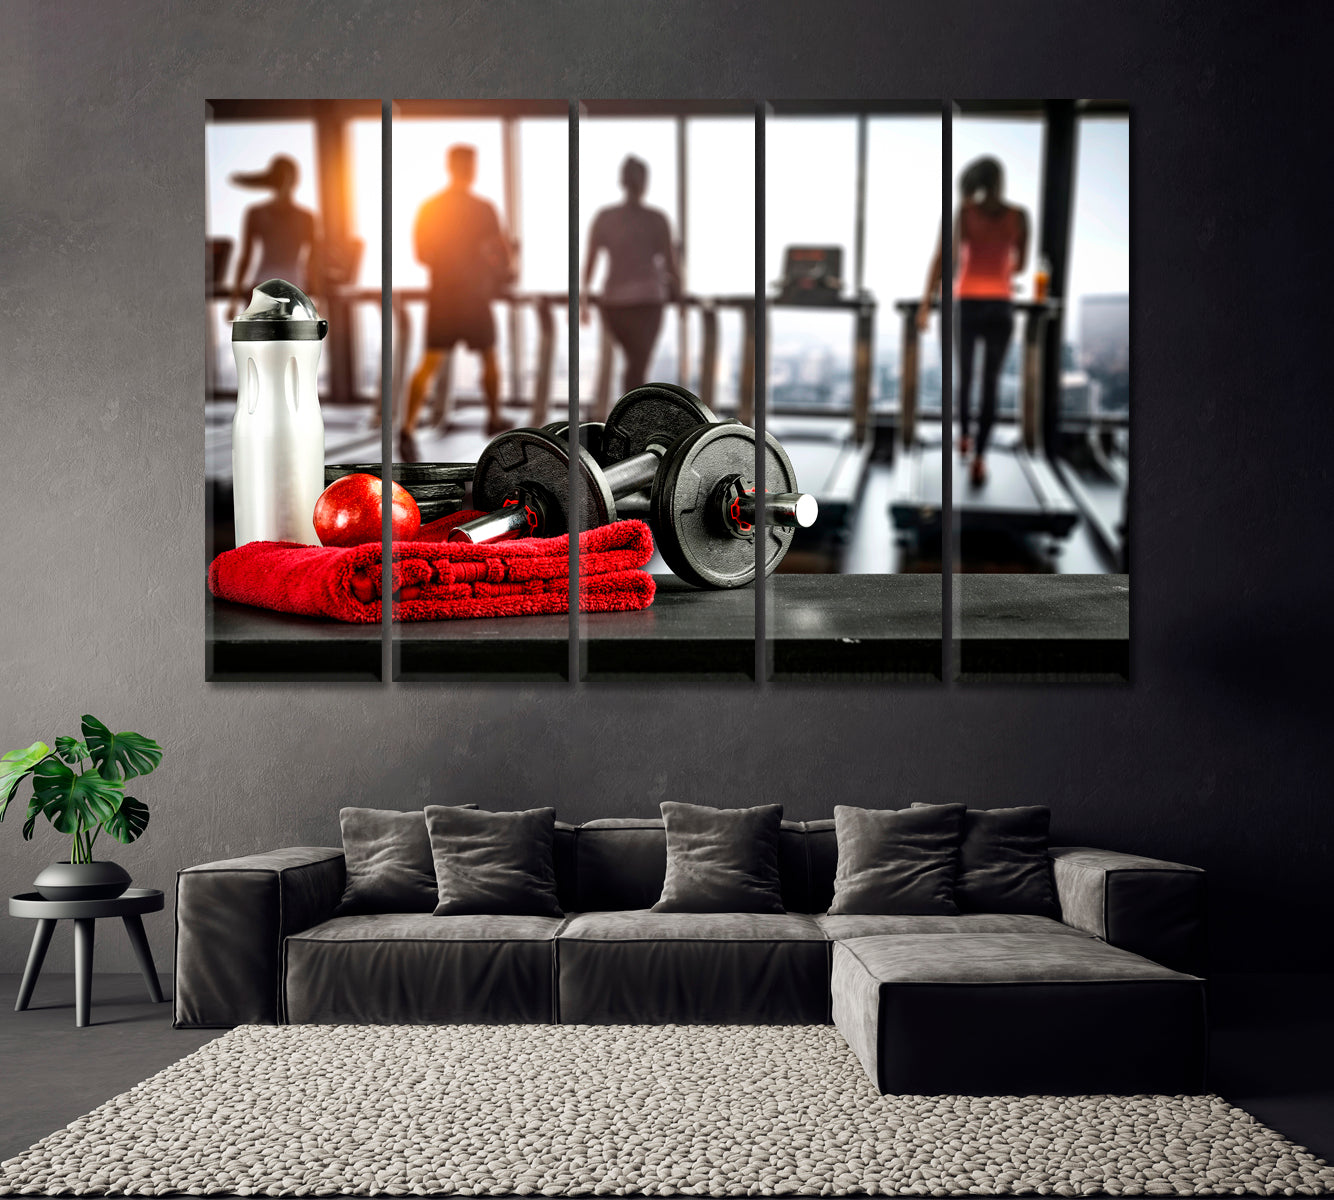 Dumbbells in Gym Canvas Print ArtLexy 5 Panels 36"x24" inches 